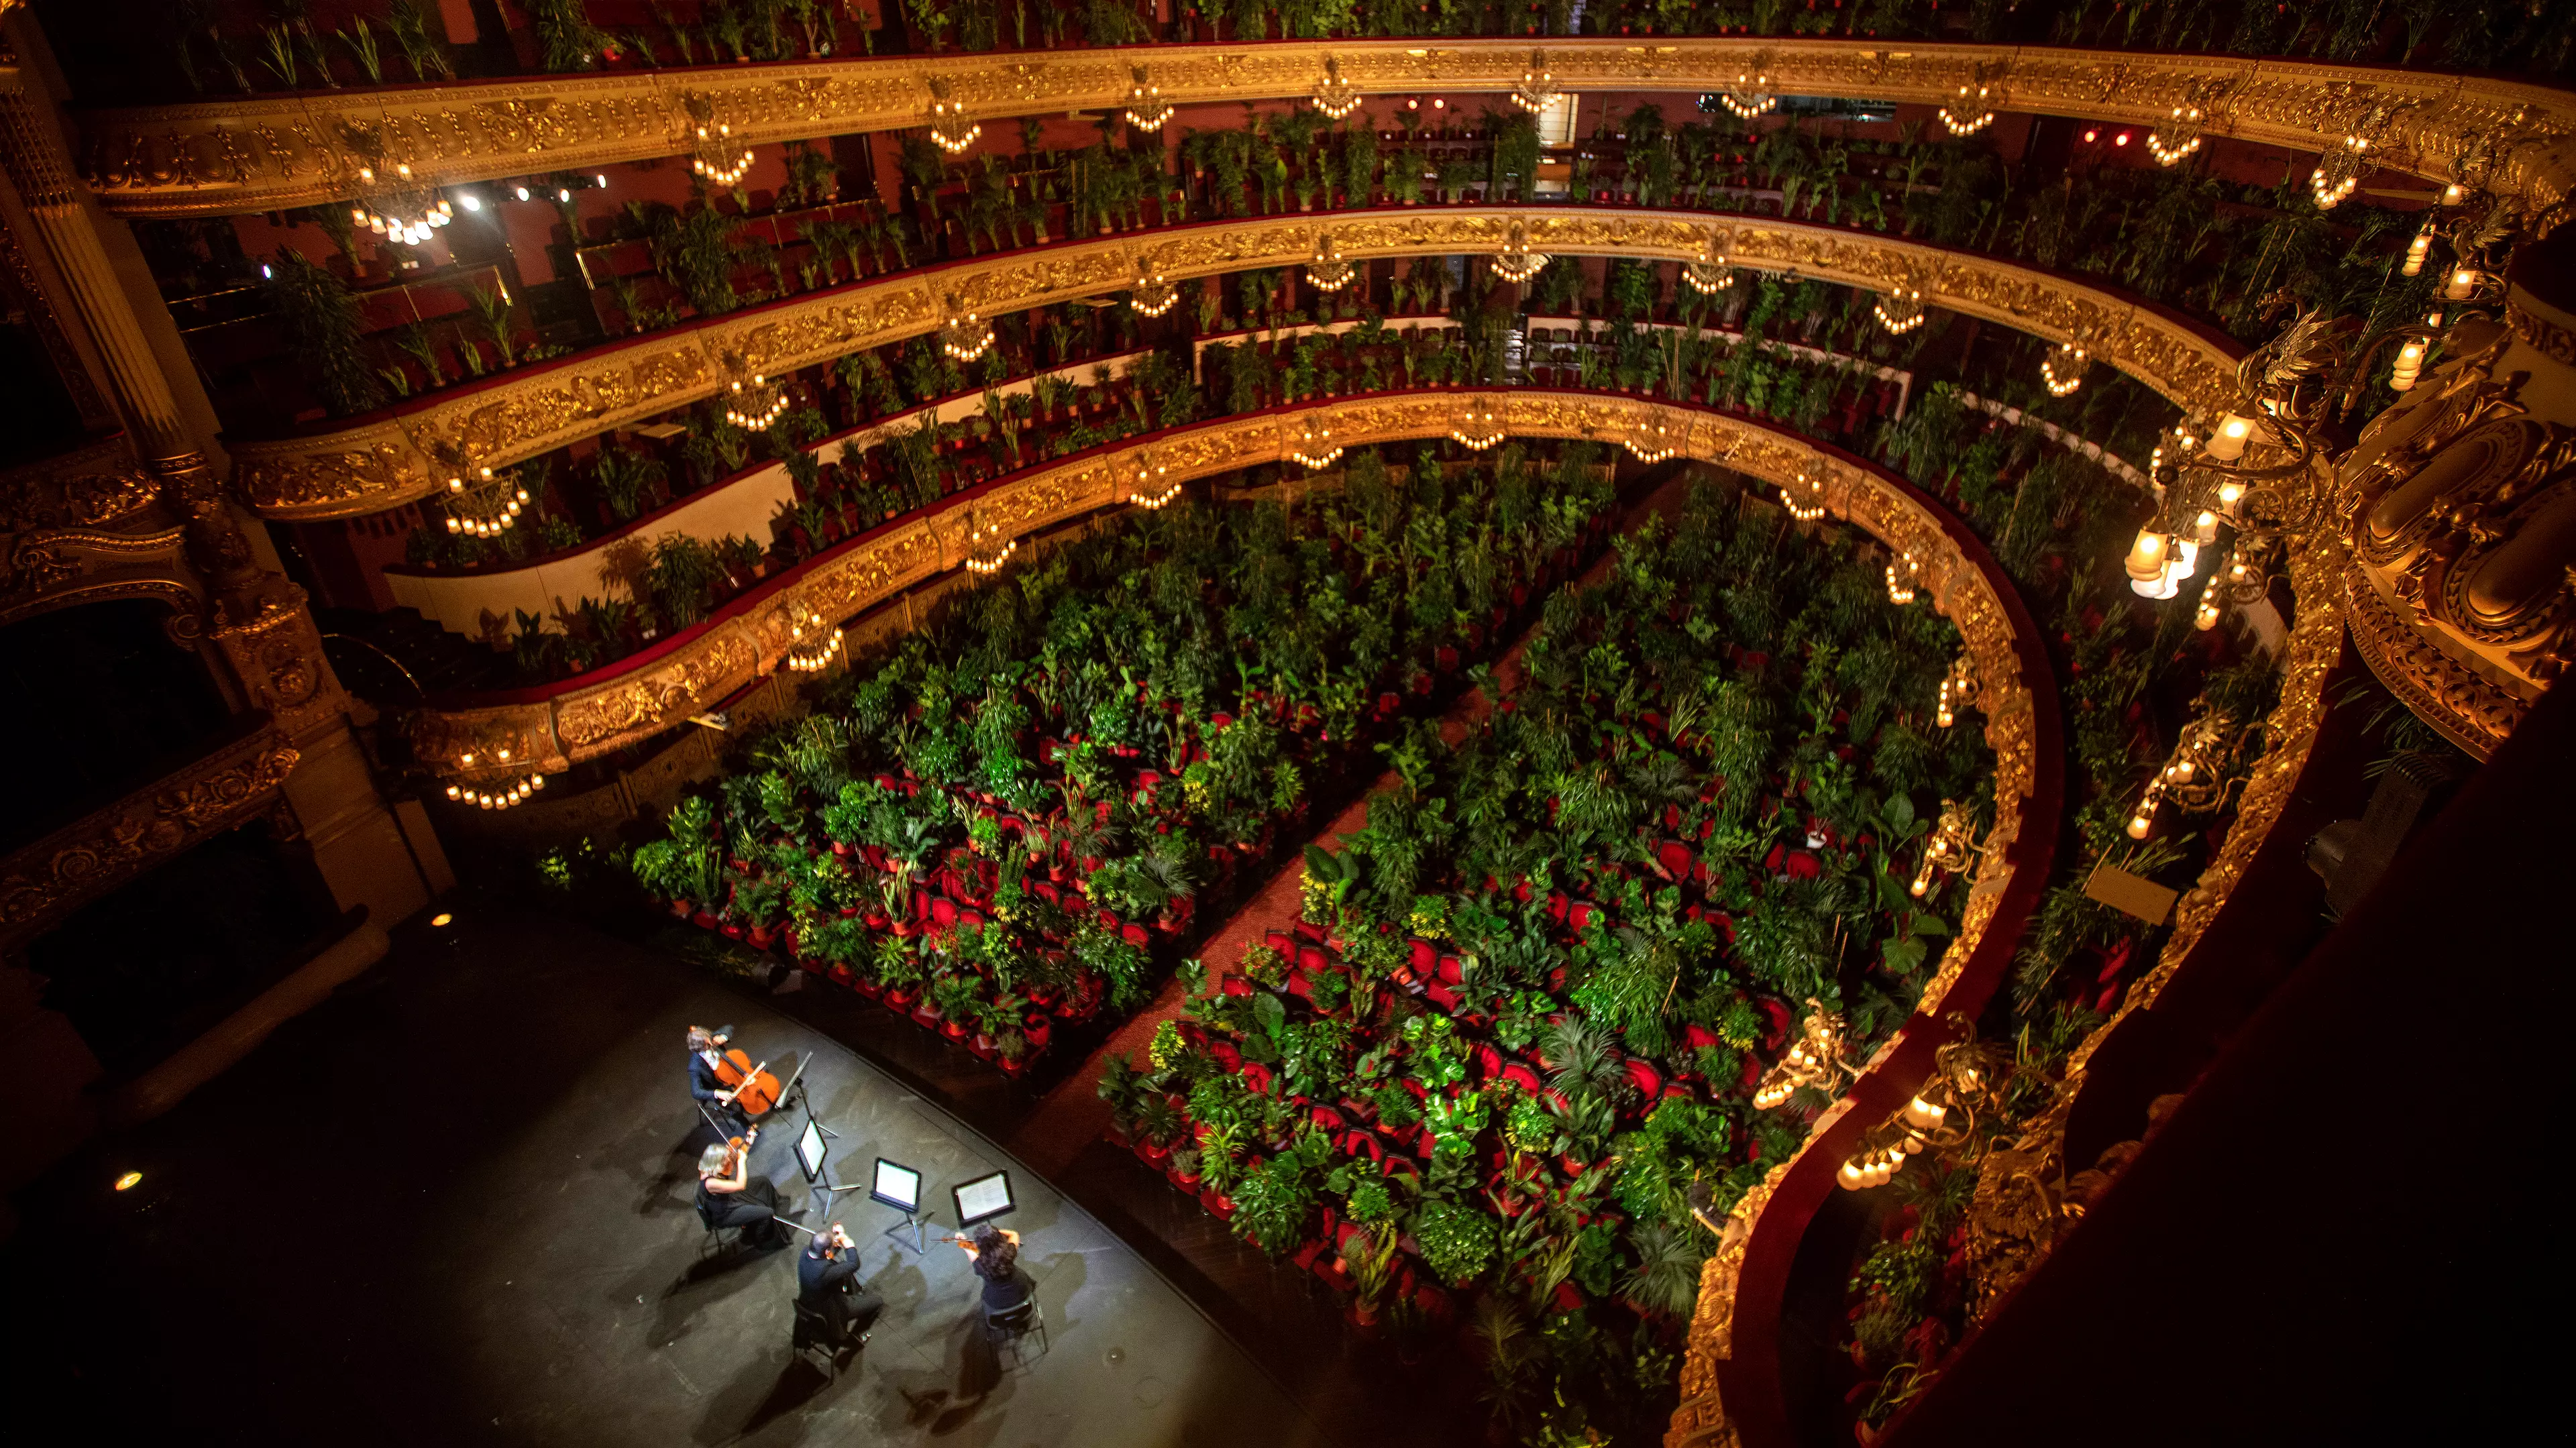 Barcelona's Opera House Hosts First Event In Three Months In Front Of 2,295 Indoor Plants